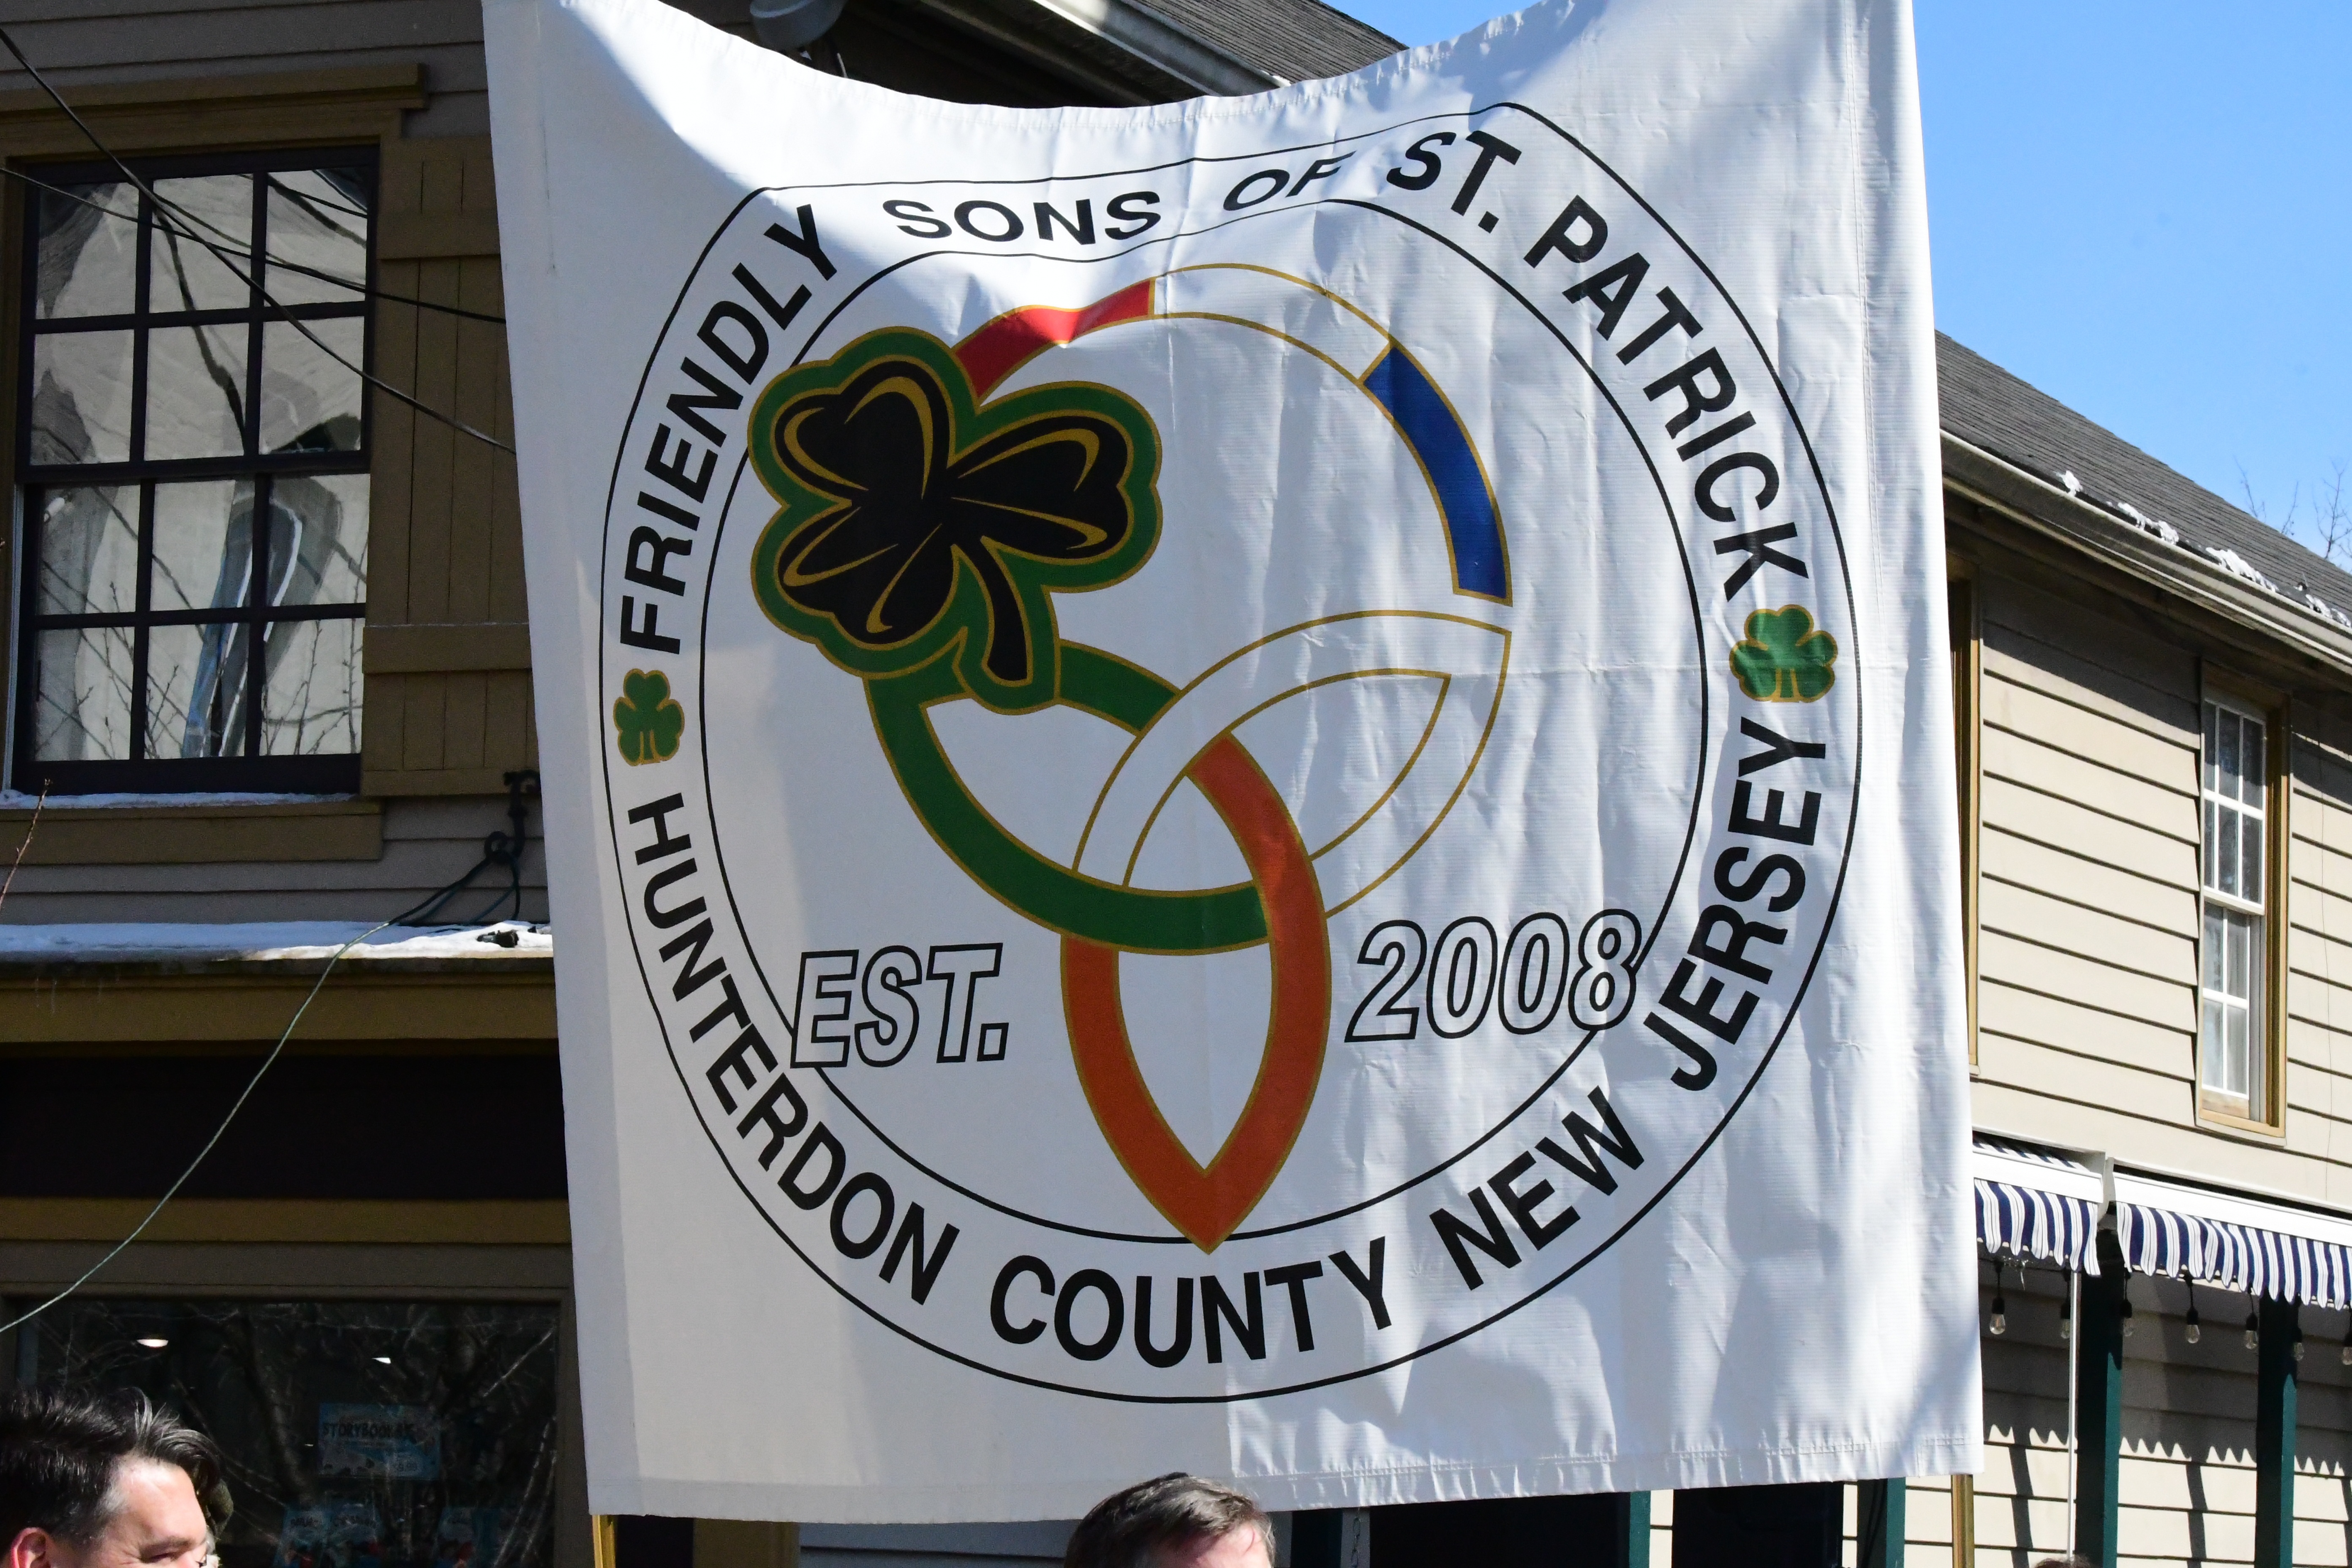 The 2022 St. Patrick's Day Parade hosted by the Friendly Sons of St. Patrick Hunterdon County in Clinton on March 13.